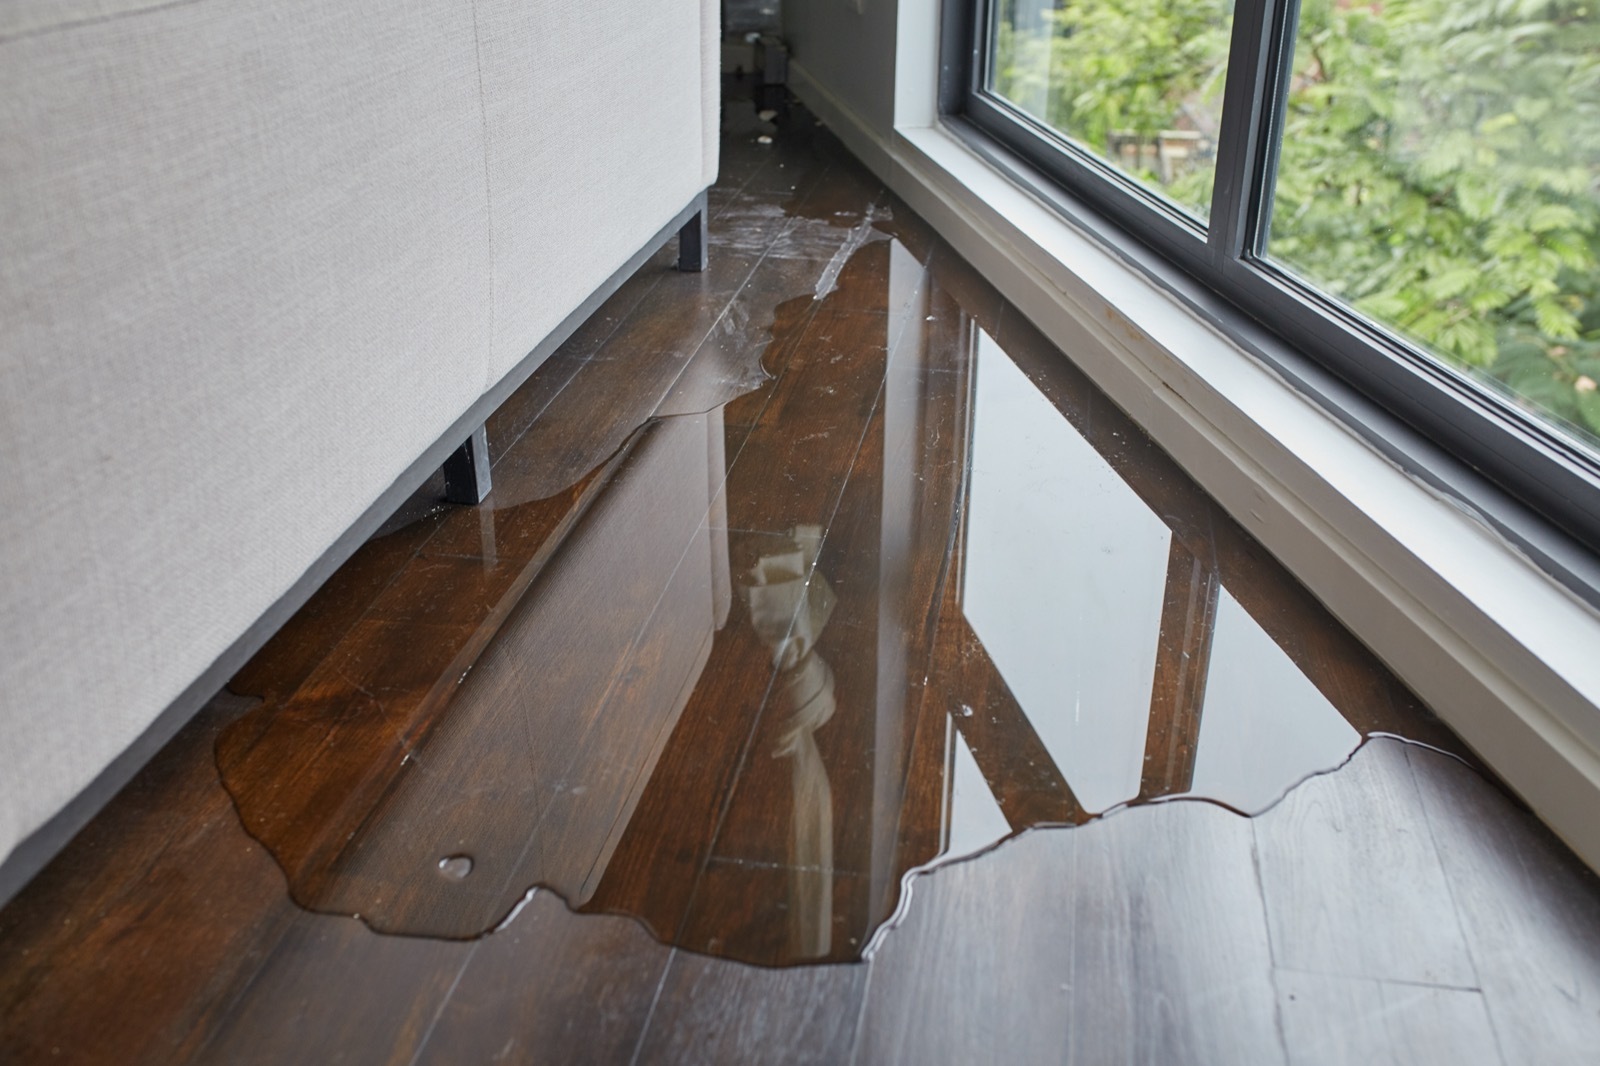 How to Deal with Flood Damage | Christian Brothers Flooring & Interiors